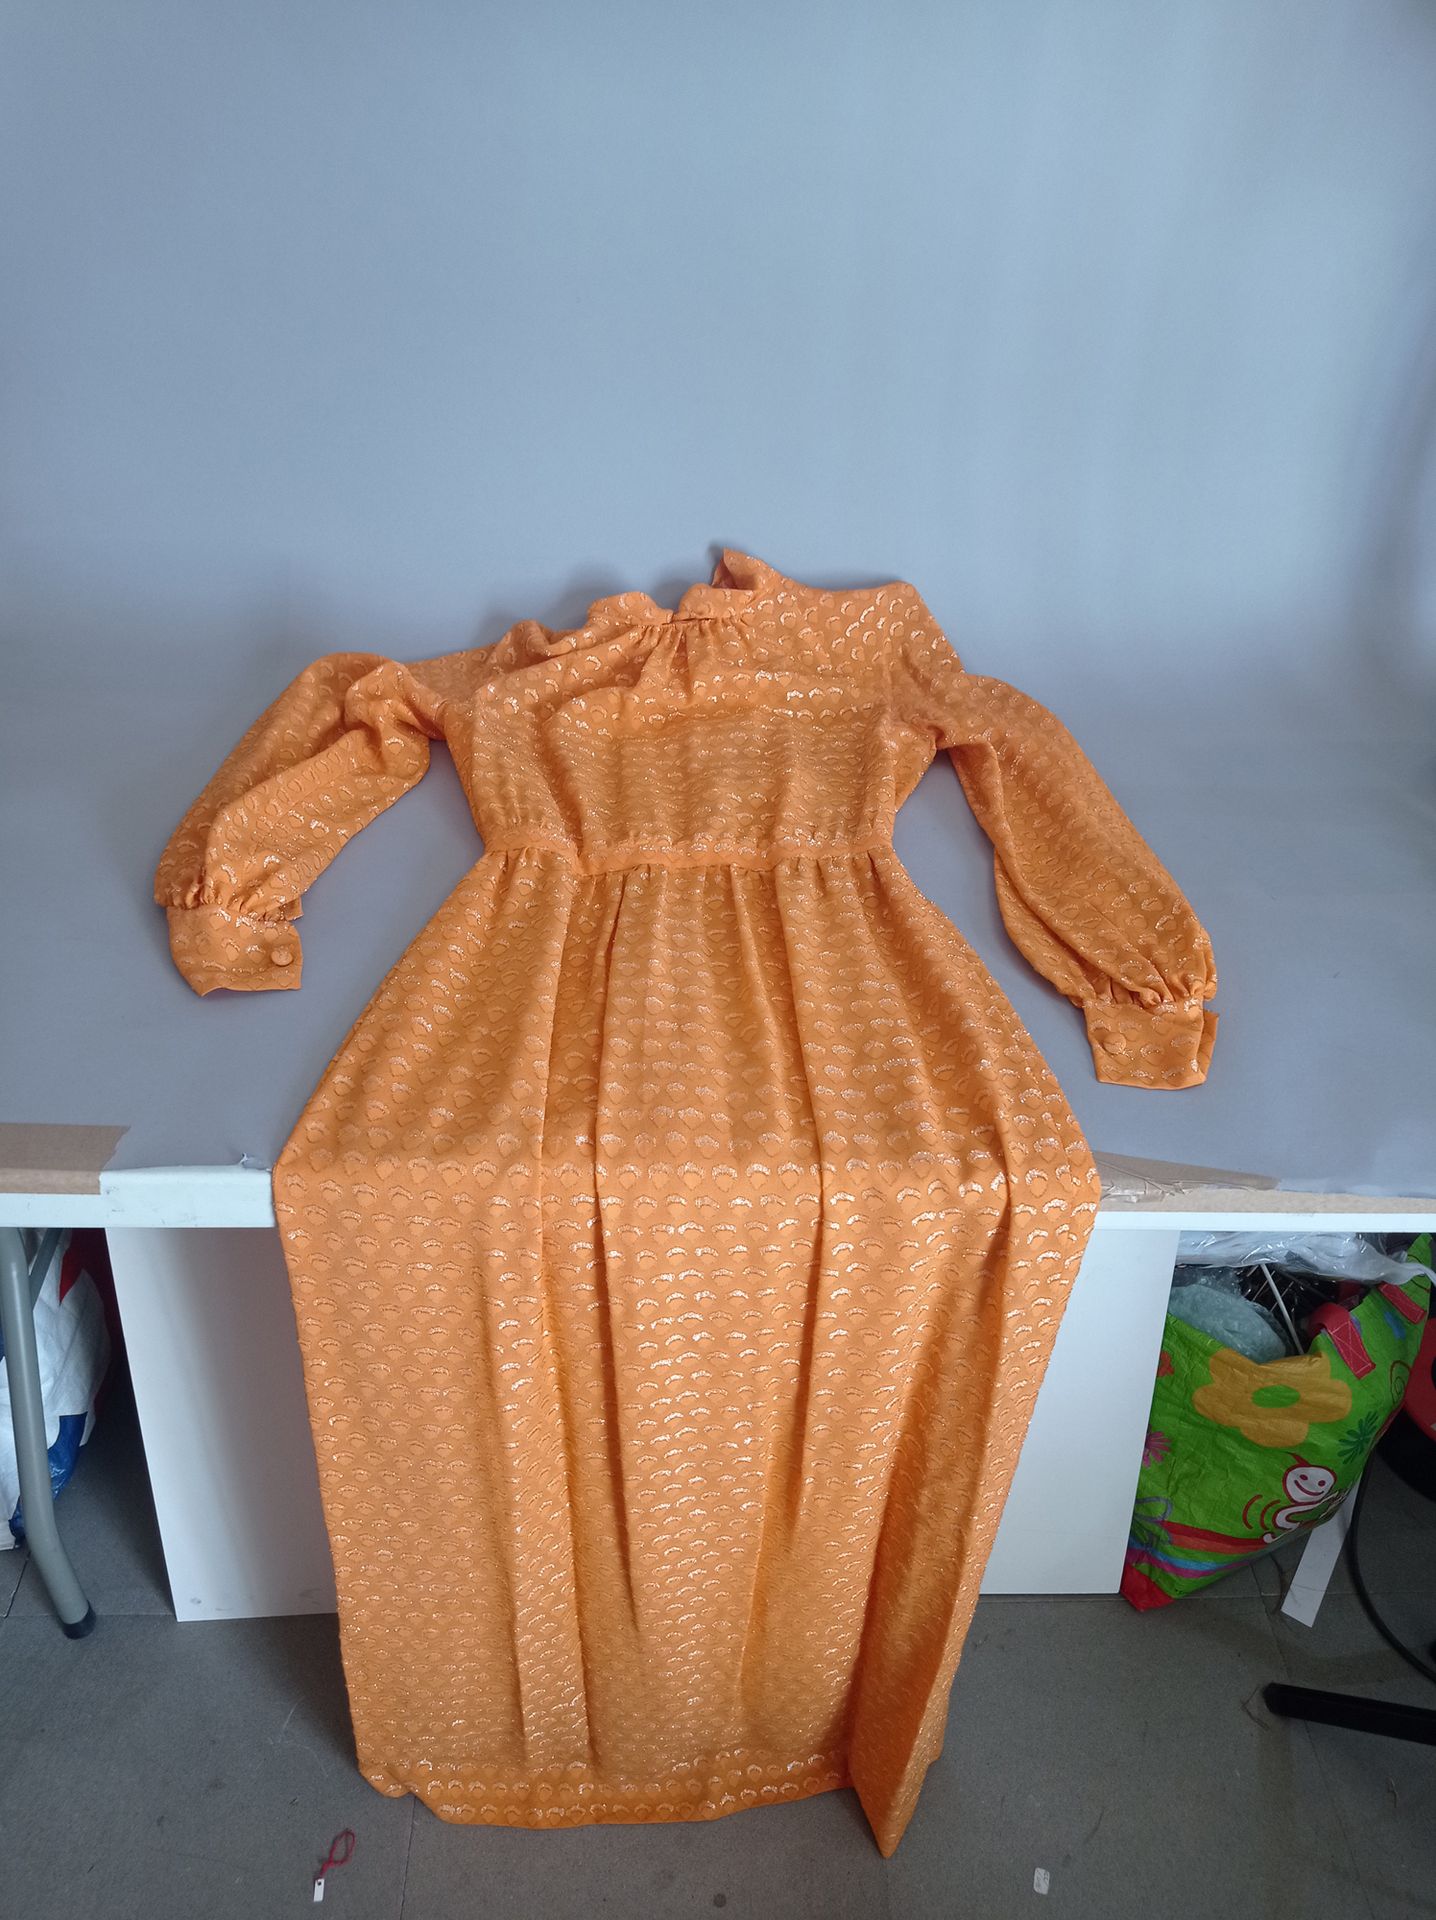 DIOR Boutique Orange dress with silver stylized patterns